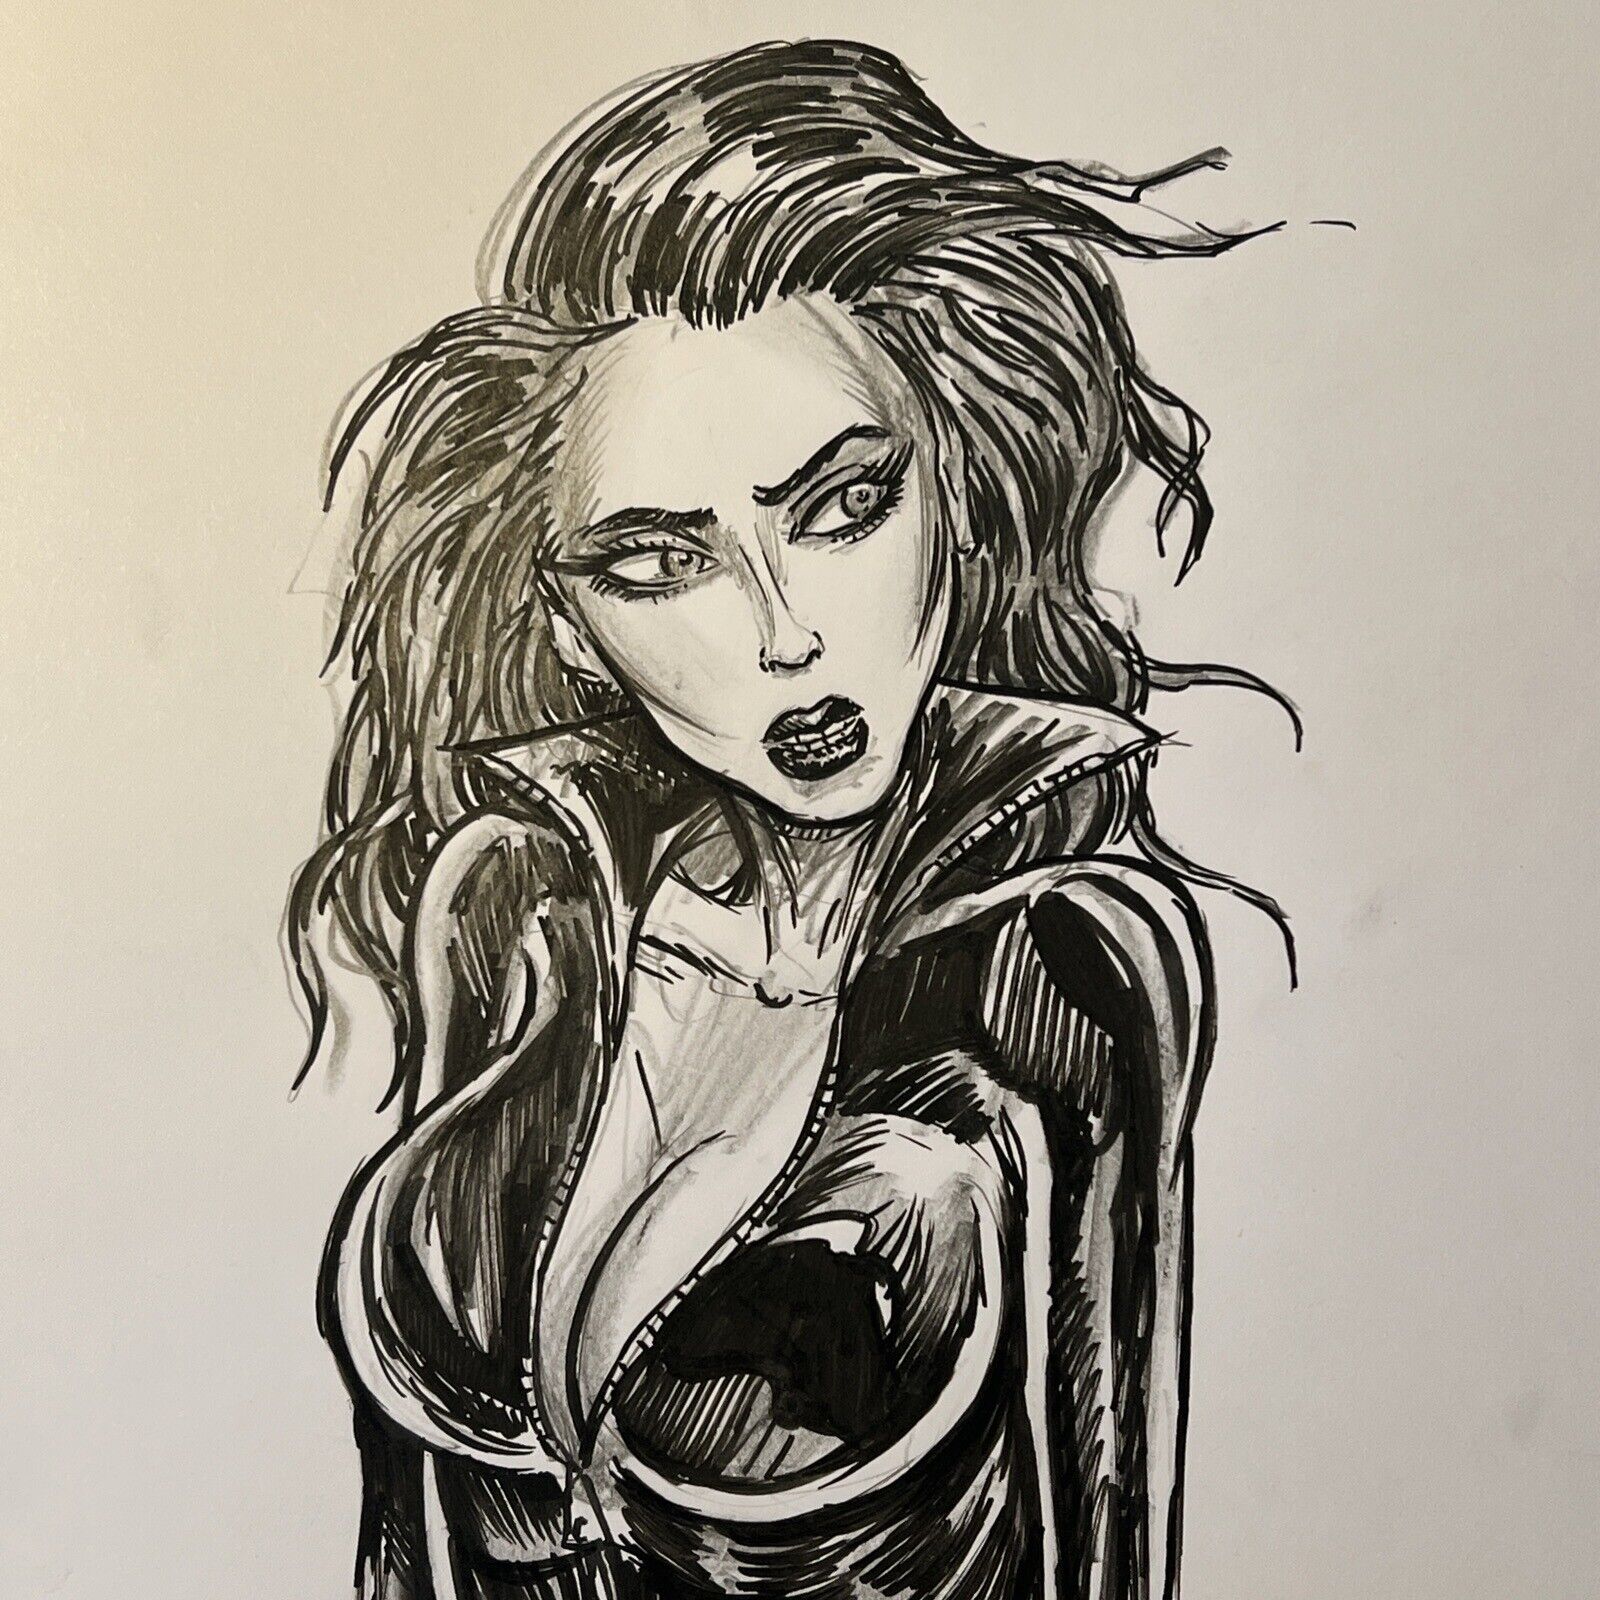 Sexy Femme Fatale In Leather Lingerie Original Art drawing By Frank Forte